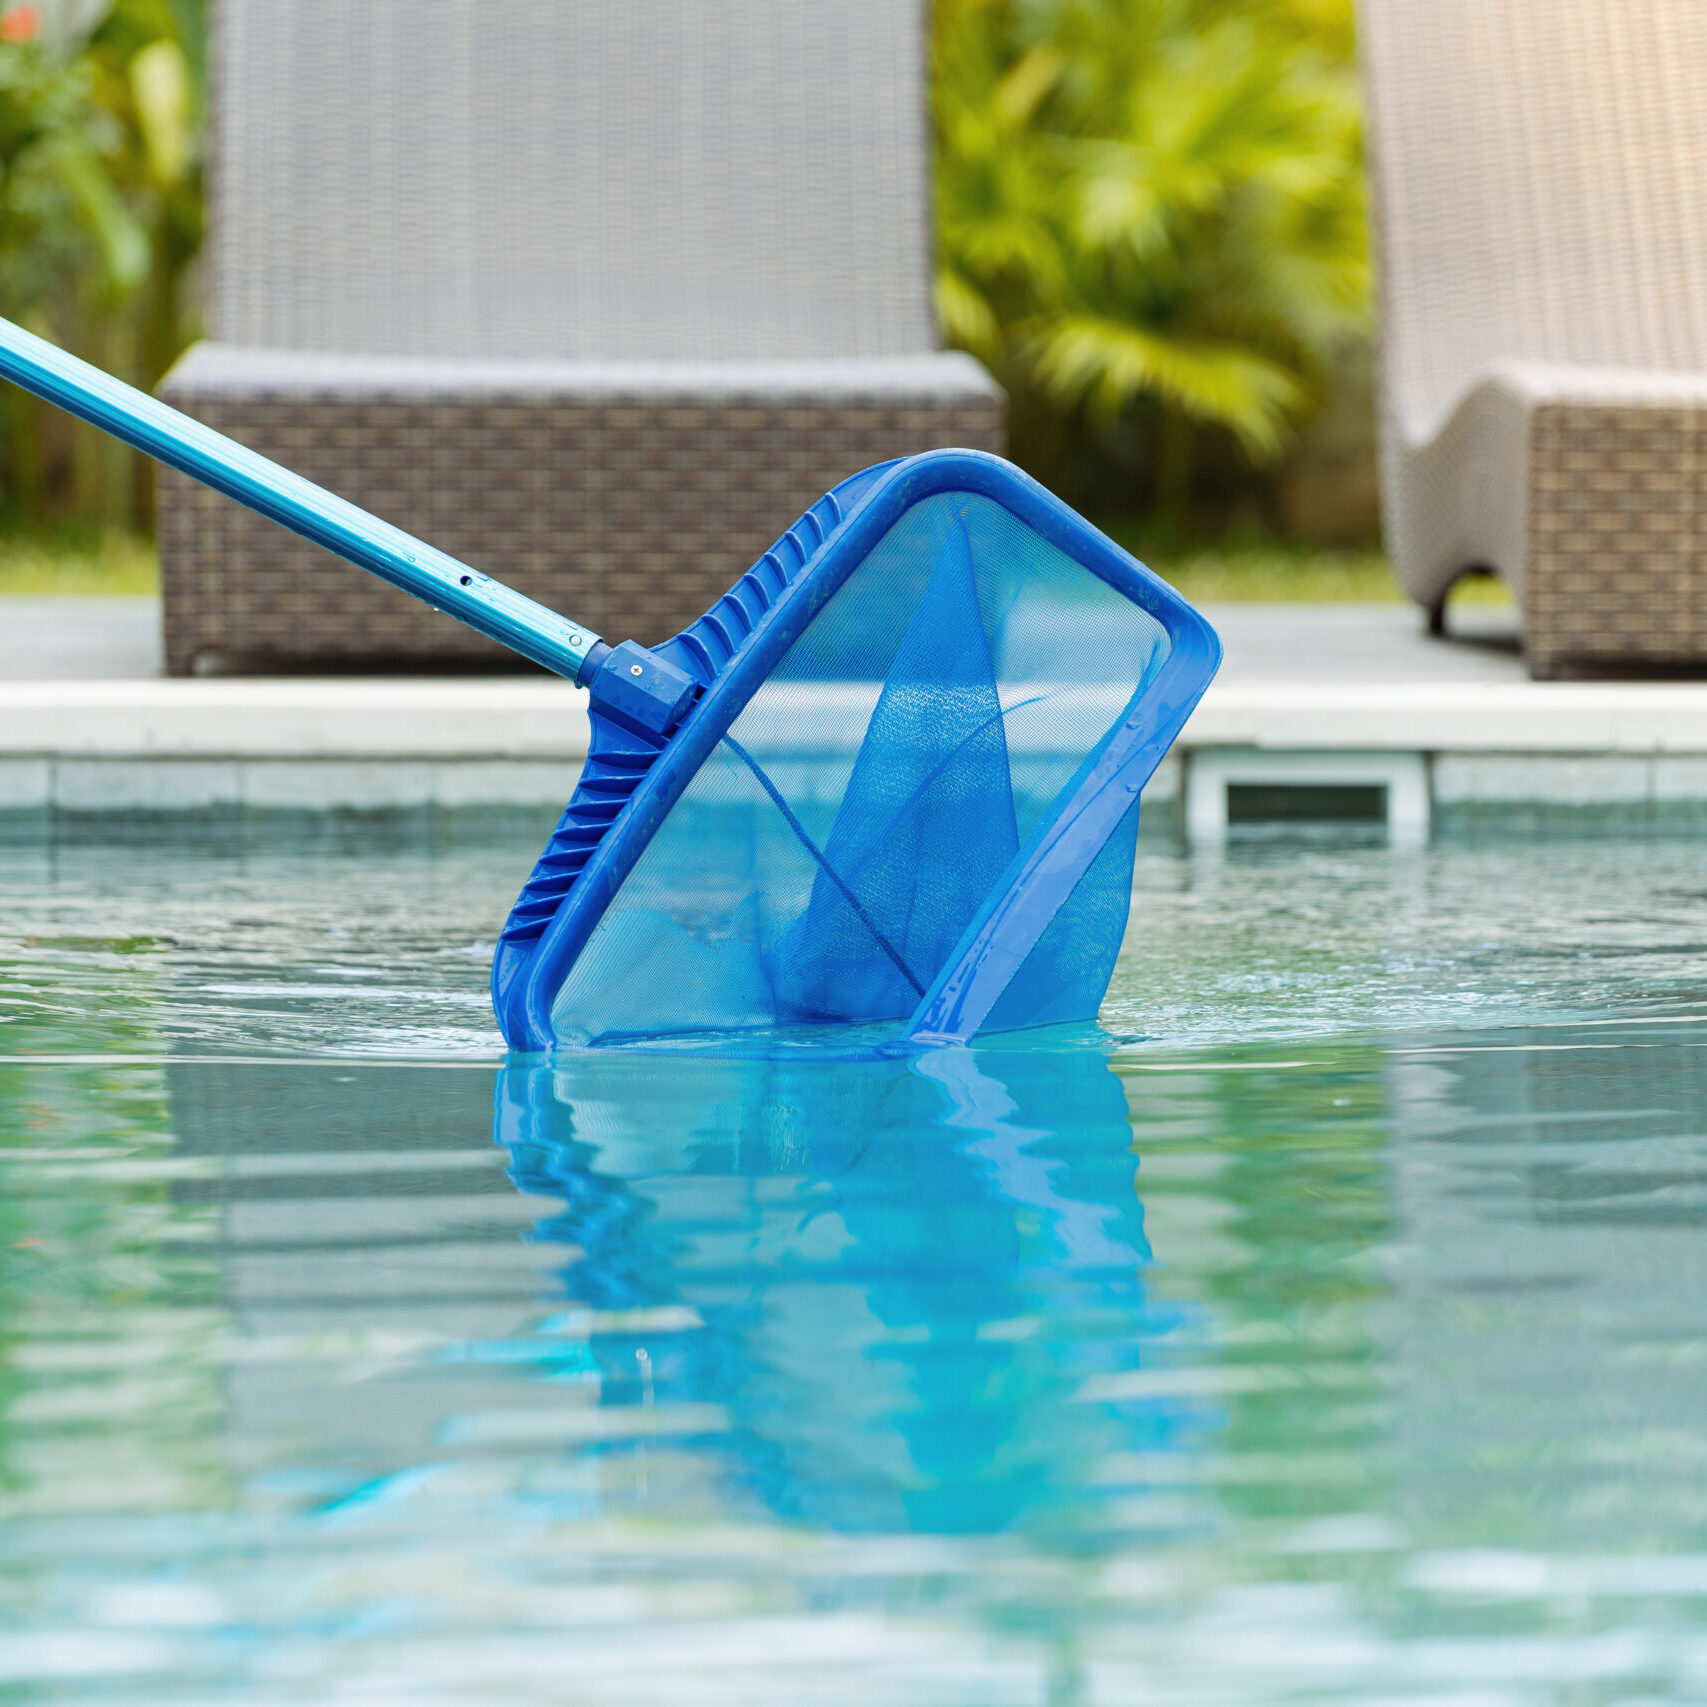 Cleaning,Swimming,Pool,Of,Fallen,Leaves,With,Skimmer,Net,Equipment